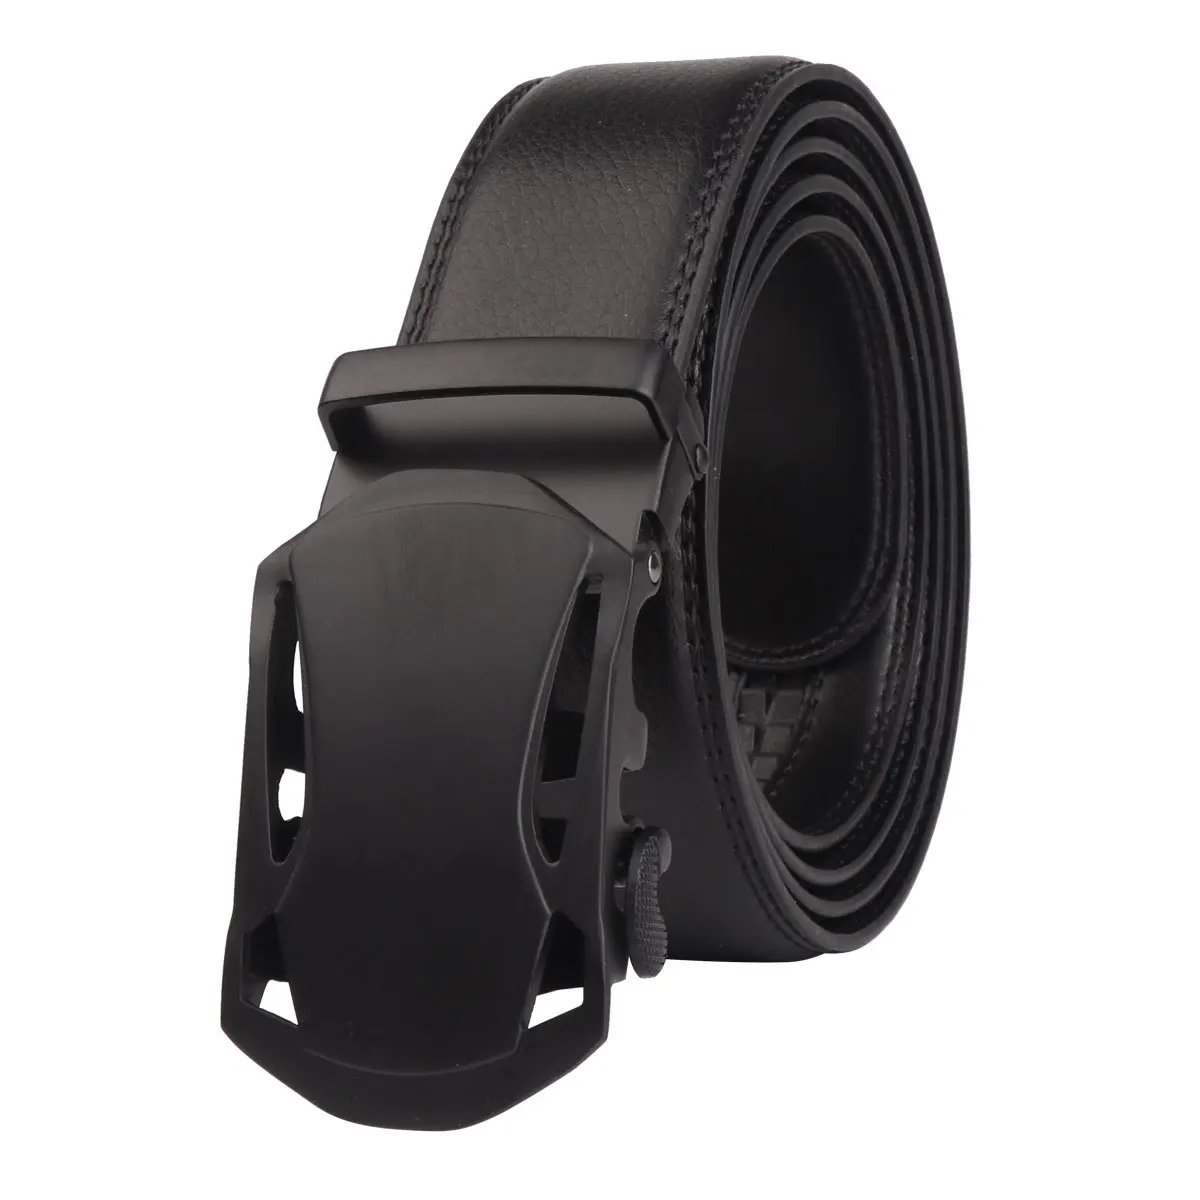 Men Belts Metal Automatic Buckle Brand High Quality Leather Belts for Men Famous Brand Luxury Work Business Strap Waist Belt